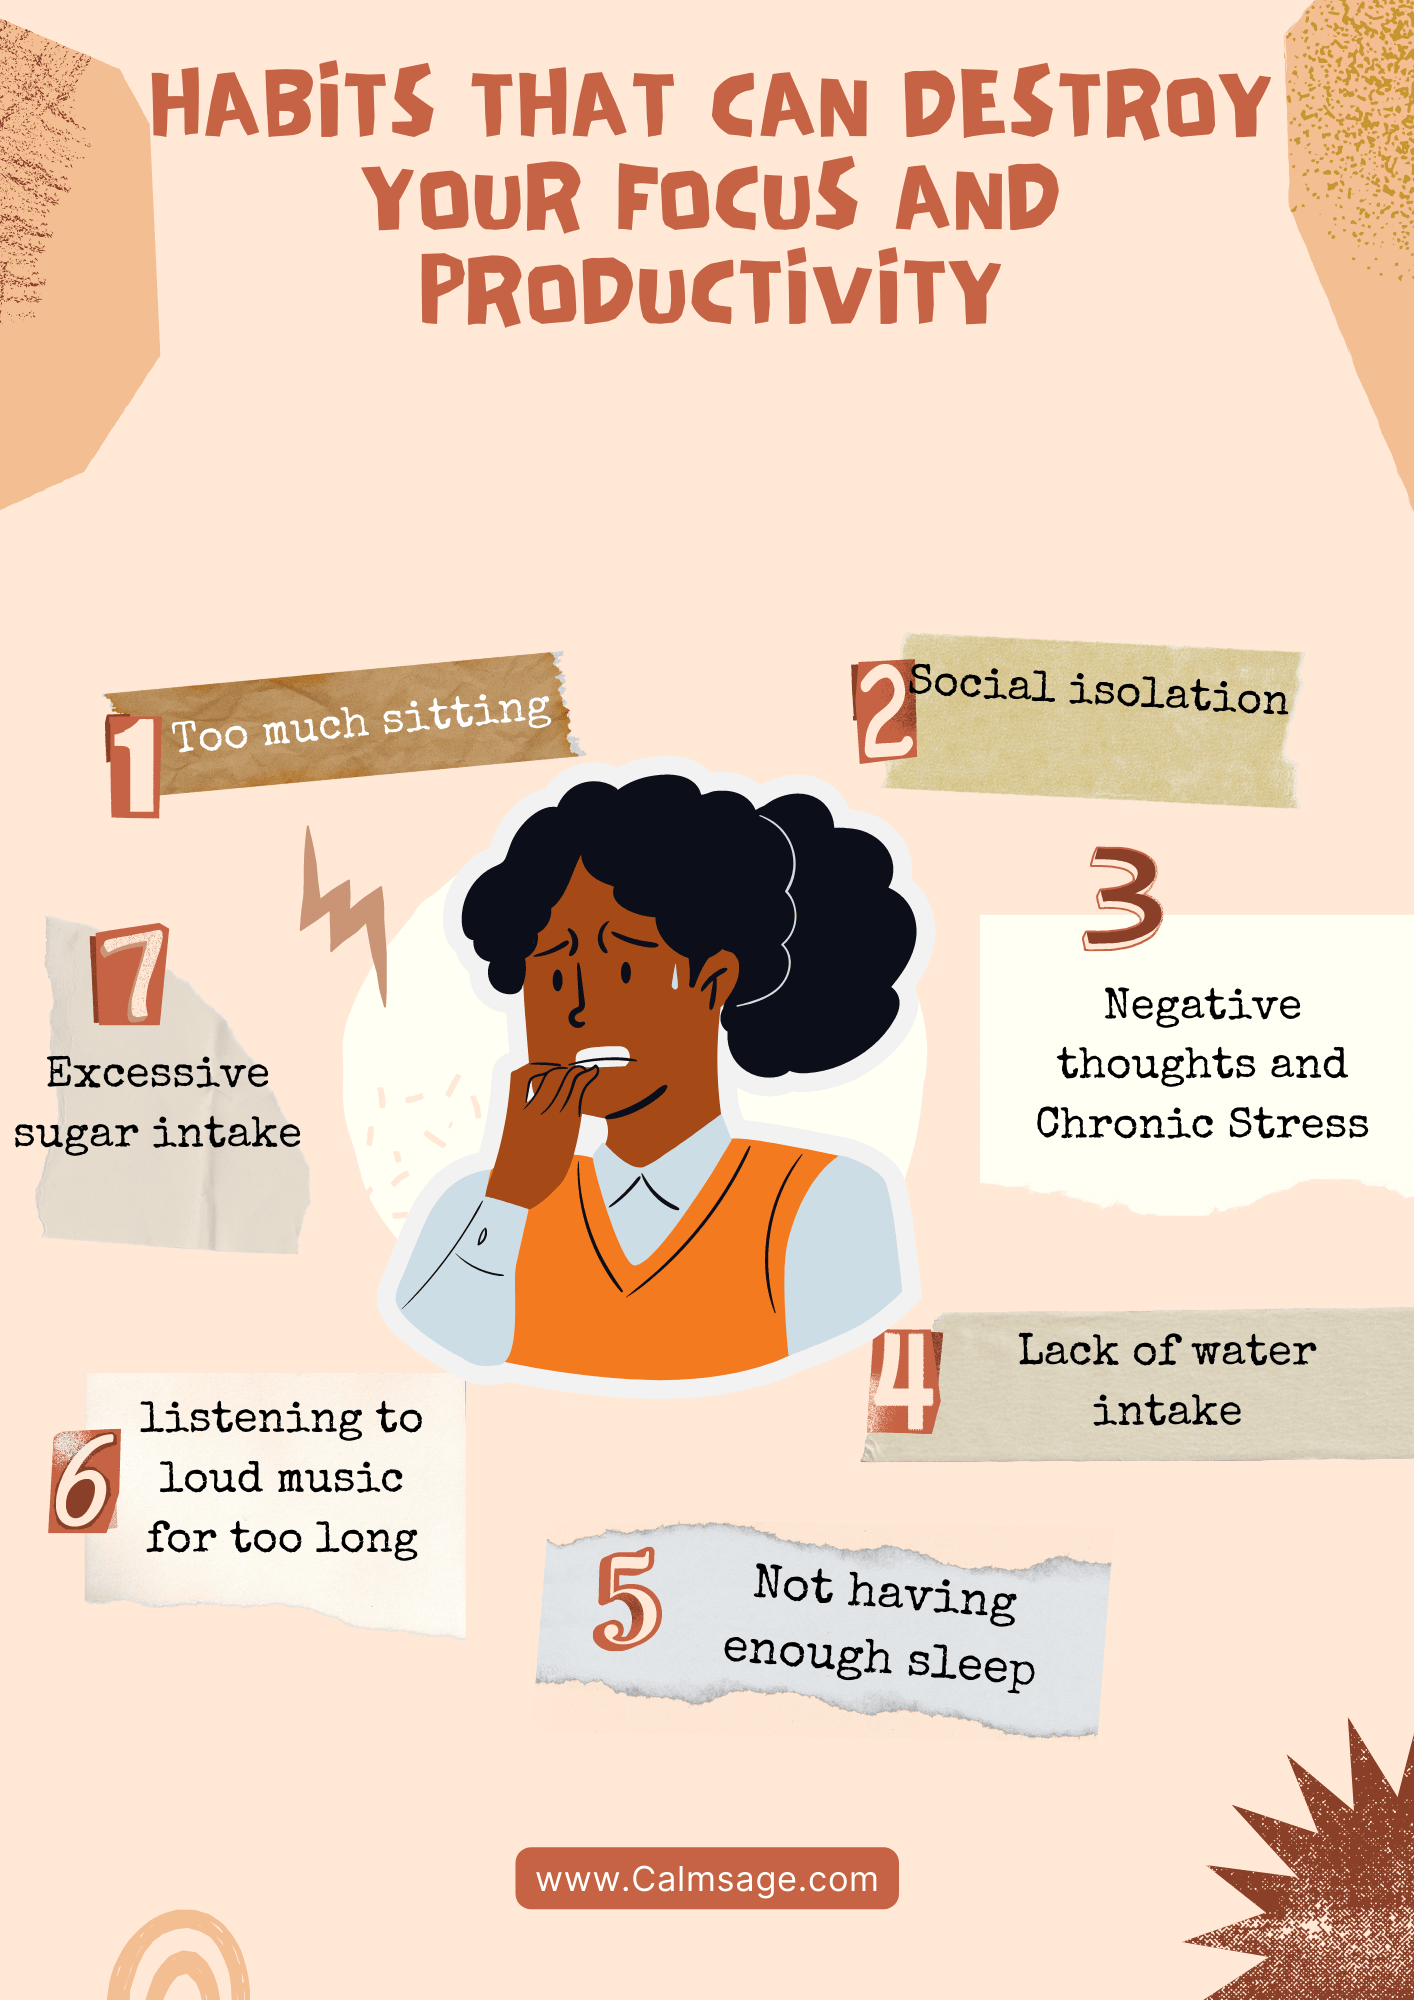 Habits that Can Destroy Your Focus and Productivity